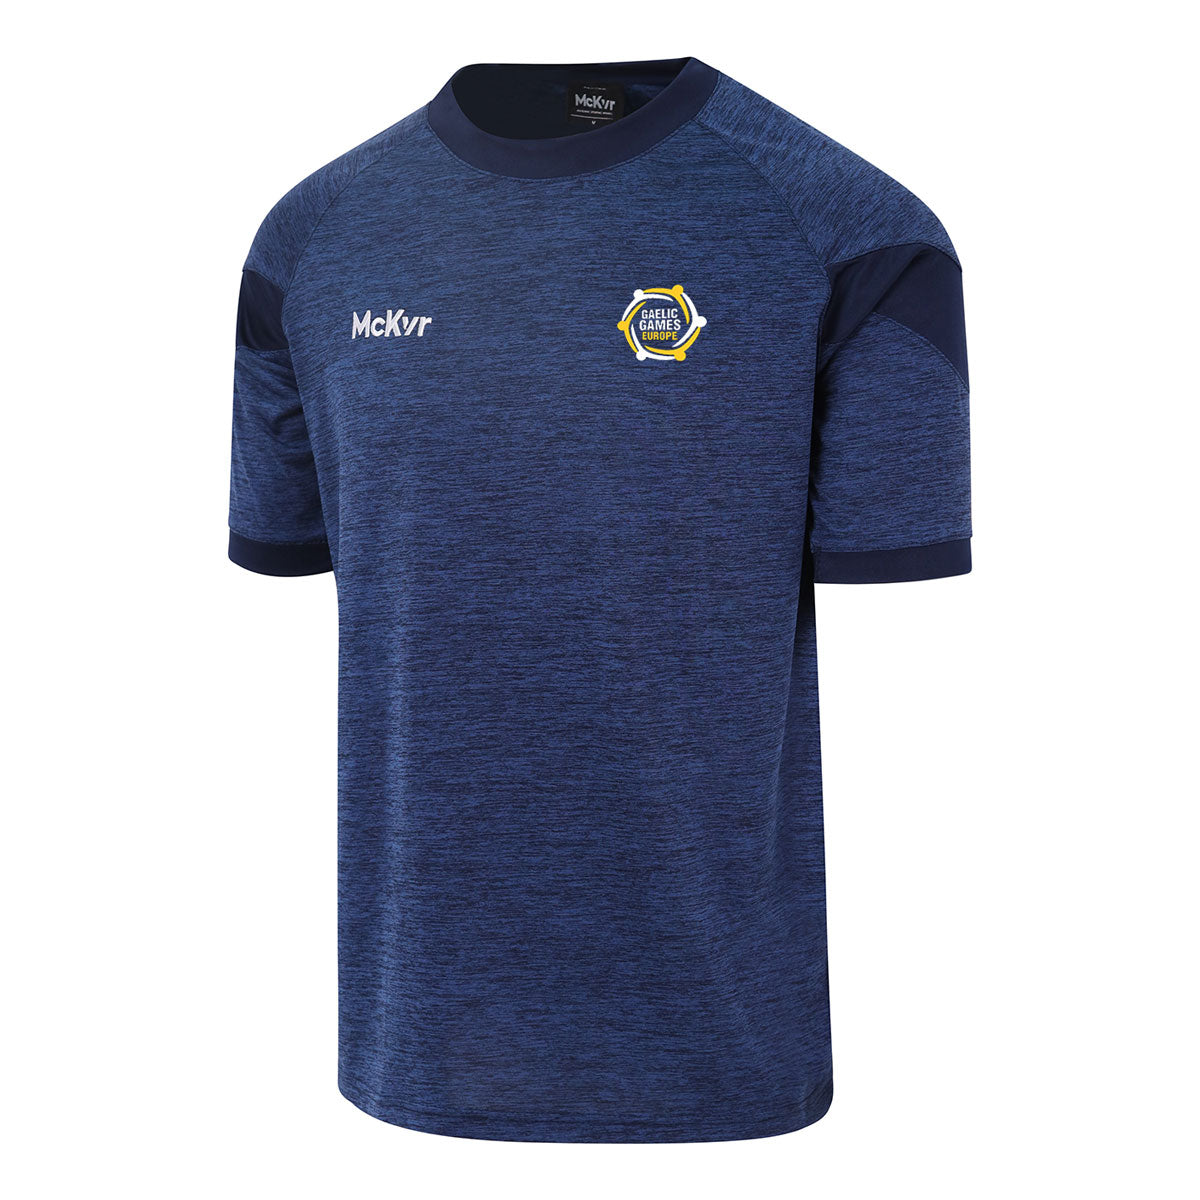 Mc Keever Gaelic Games Europe Core 22 T-Shirt - Adult - Navy